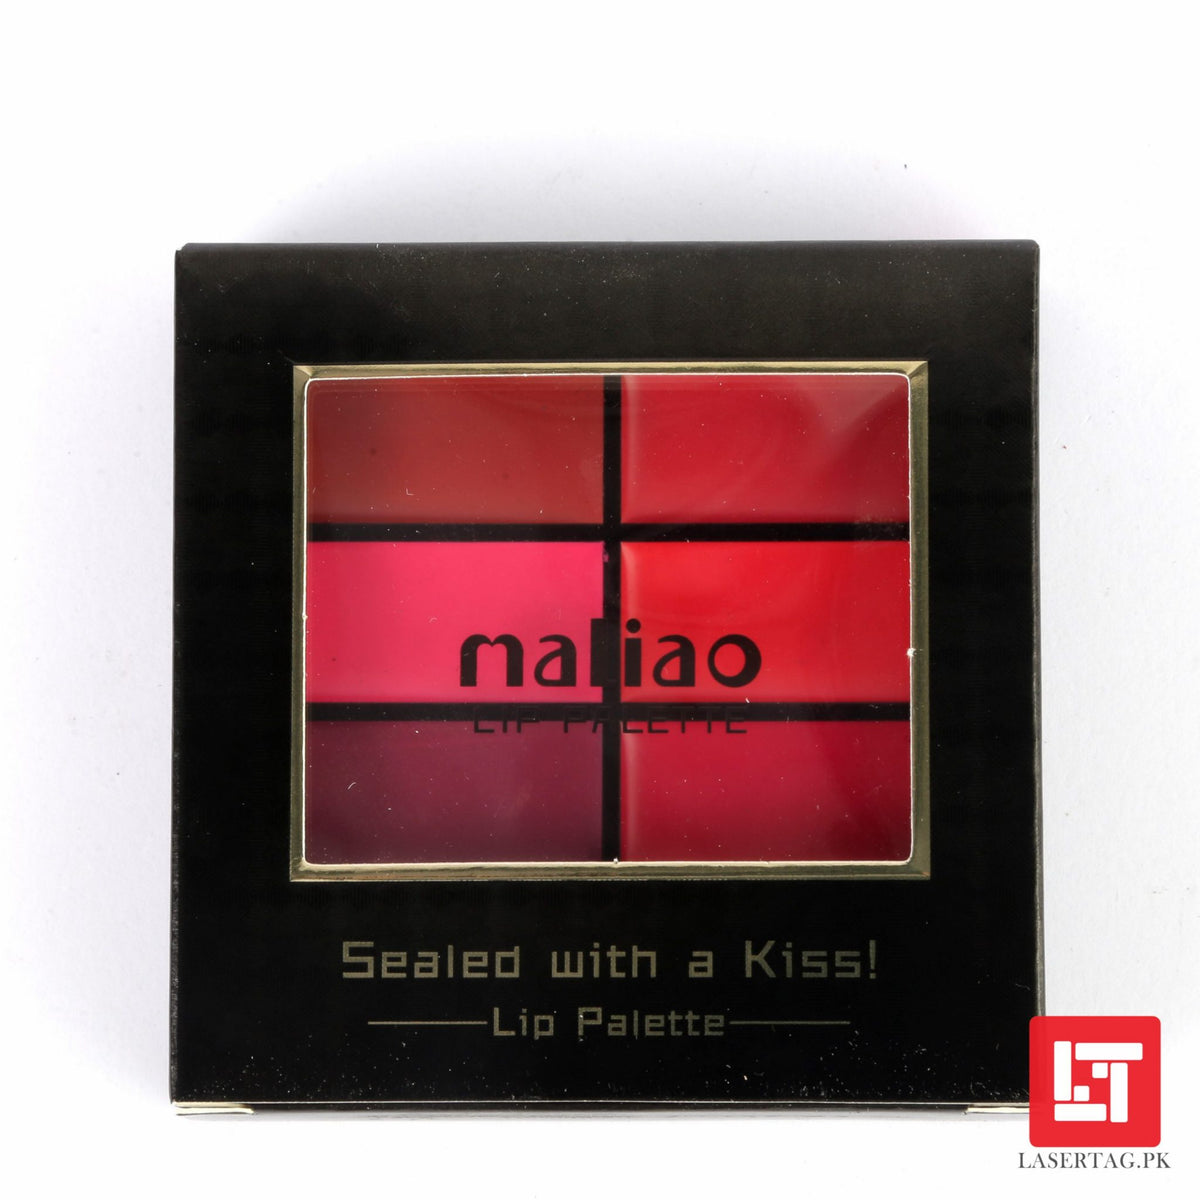 Maliao 6 Color Sealed With A Kiss Lip Palette M180-02 9g freeshipping - lasertag.pk